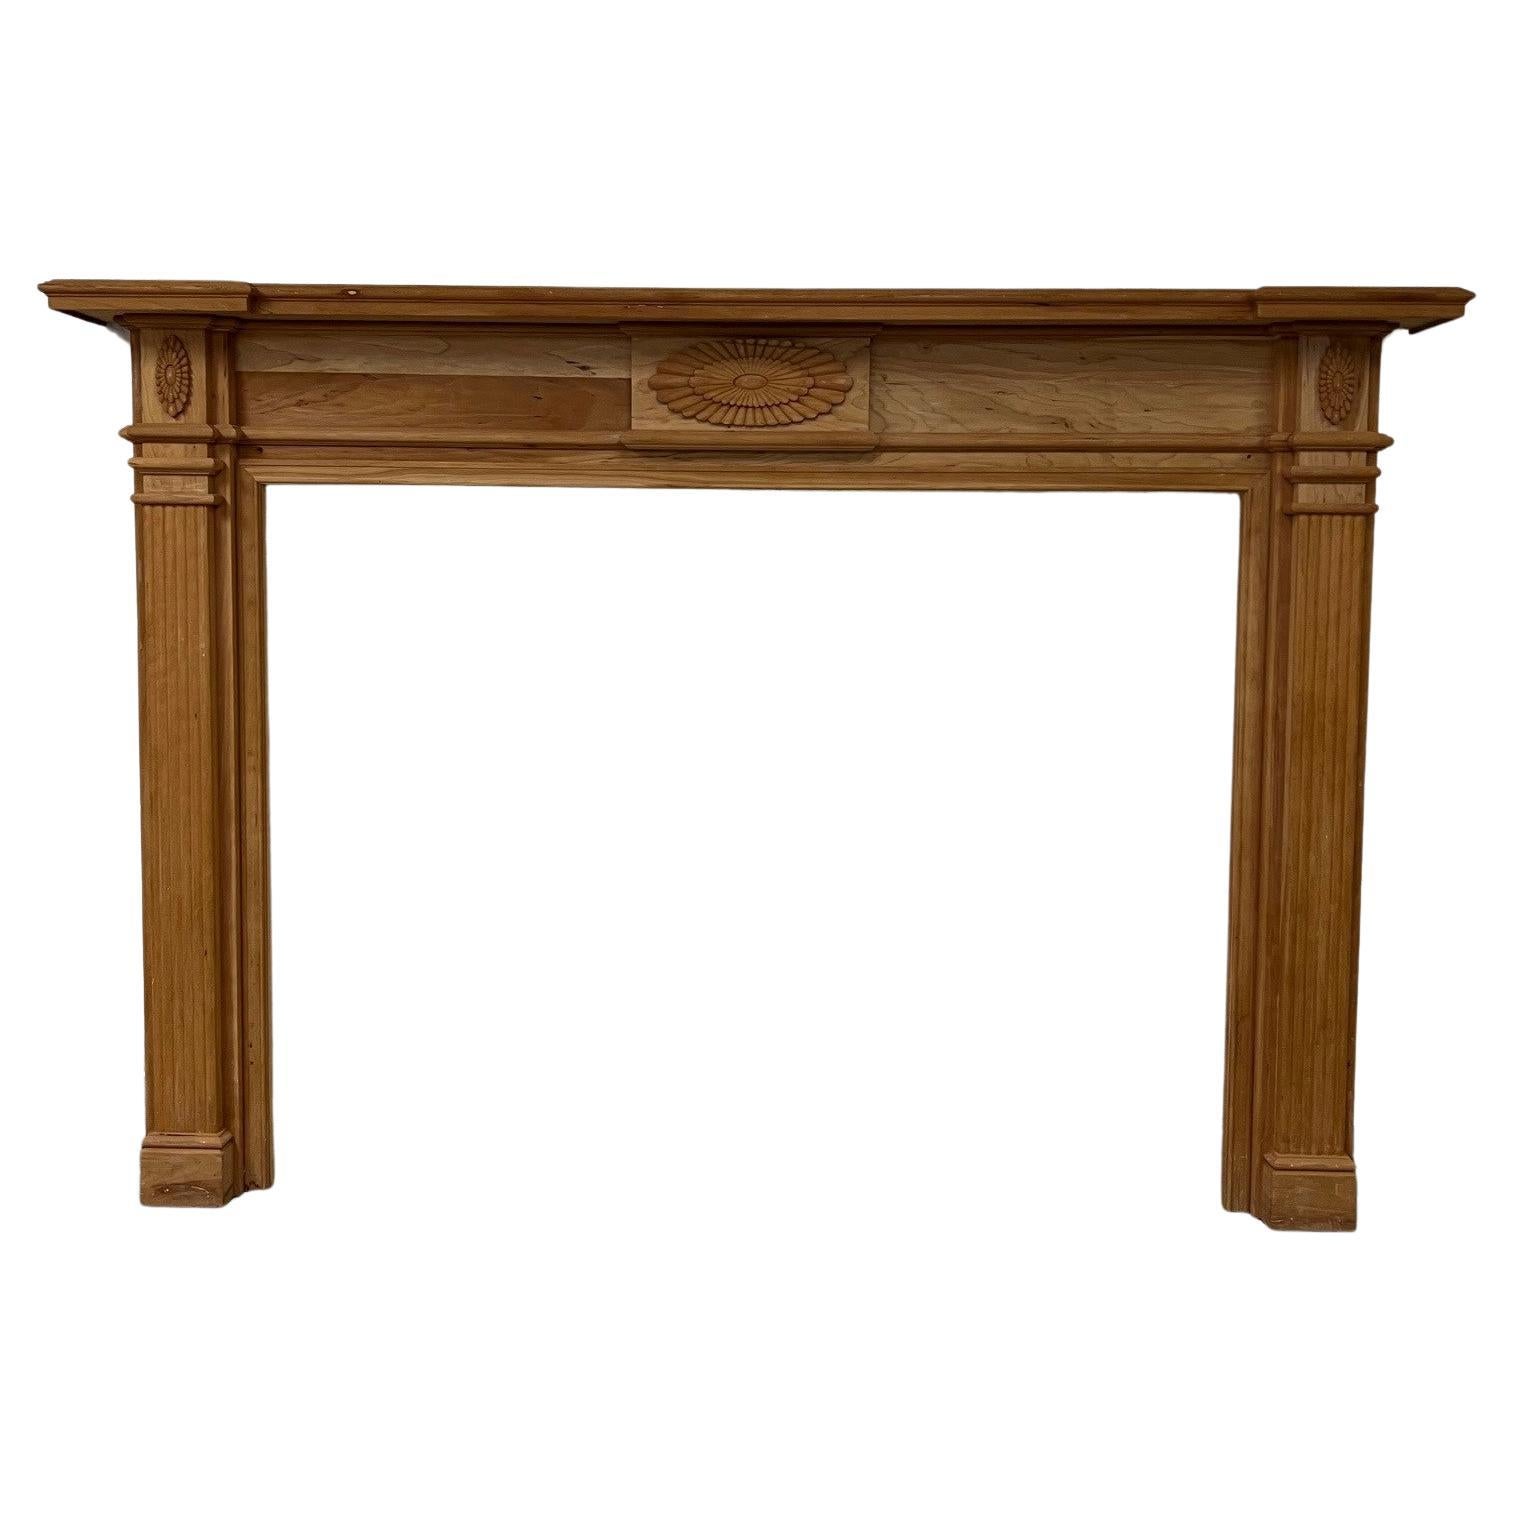 Carved Wood Fireplace Mantle Cherry with Fluted Legs Decorative Center